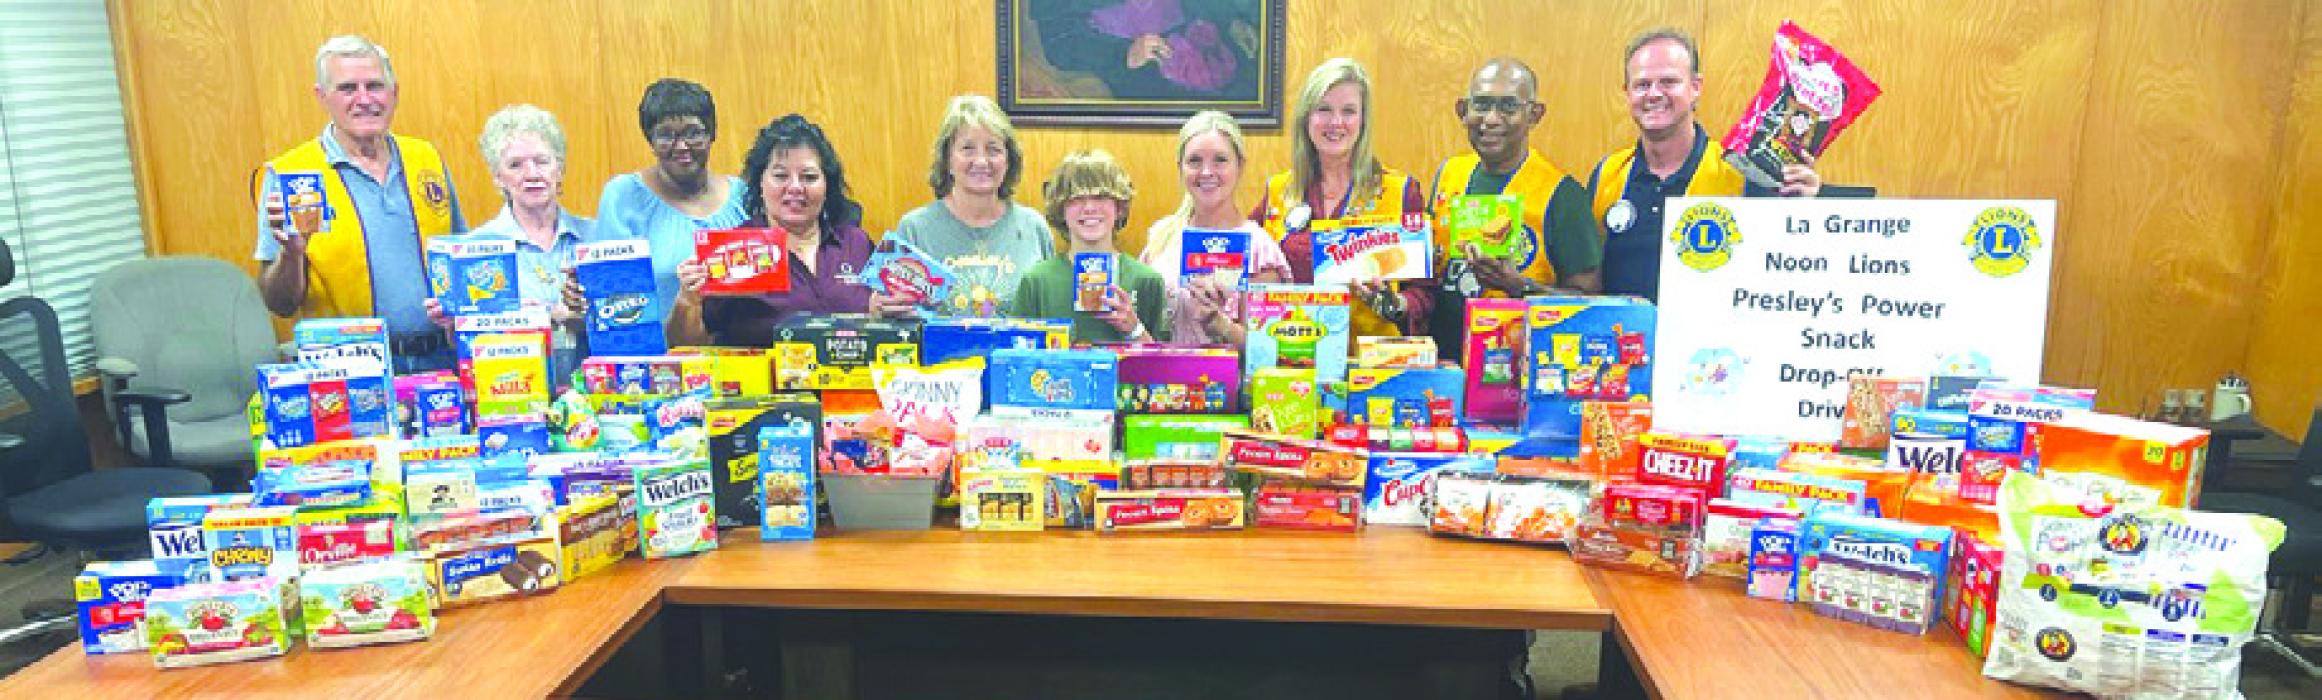 As a global initiative, Lions Club supports finding a cure for Childhood Cancer. This year La Grange Noon Lions club held a snack drive from Sept. 18 to 22 for Presley’s Power. Presley’s Power collects snack items for the parents of the children who are receiving care (for cancer) at Dell’s Children’s Hospital in Austin. The goal is to collect snack items to help stock Presley’s Pantry, which is in the parent’s locker area at Dell’s Children’s Hospital in Austin.